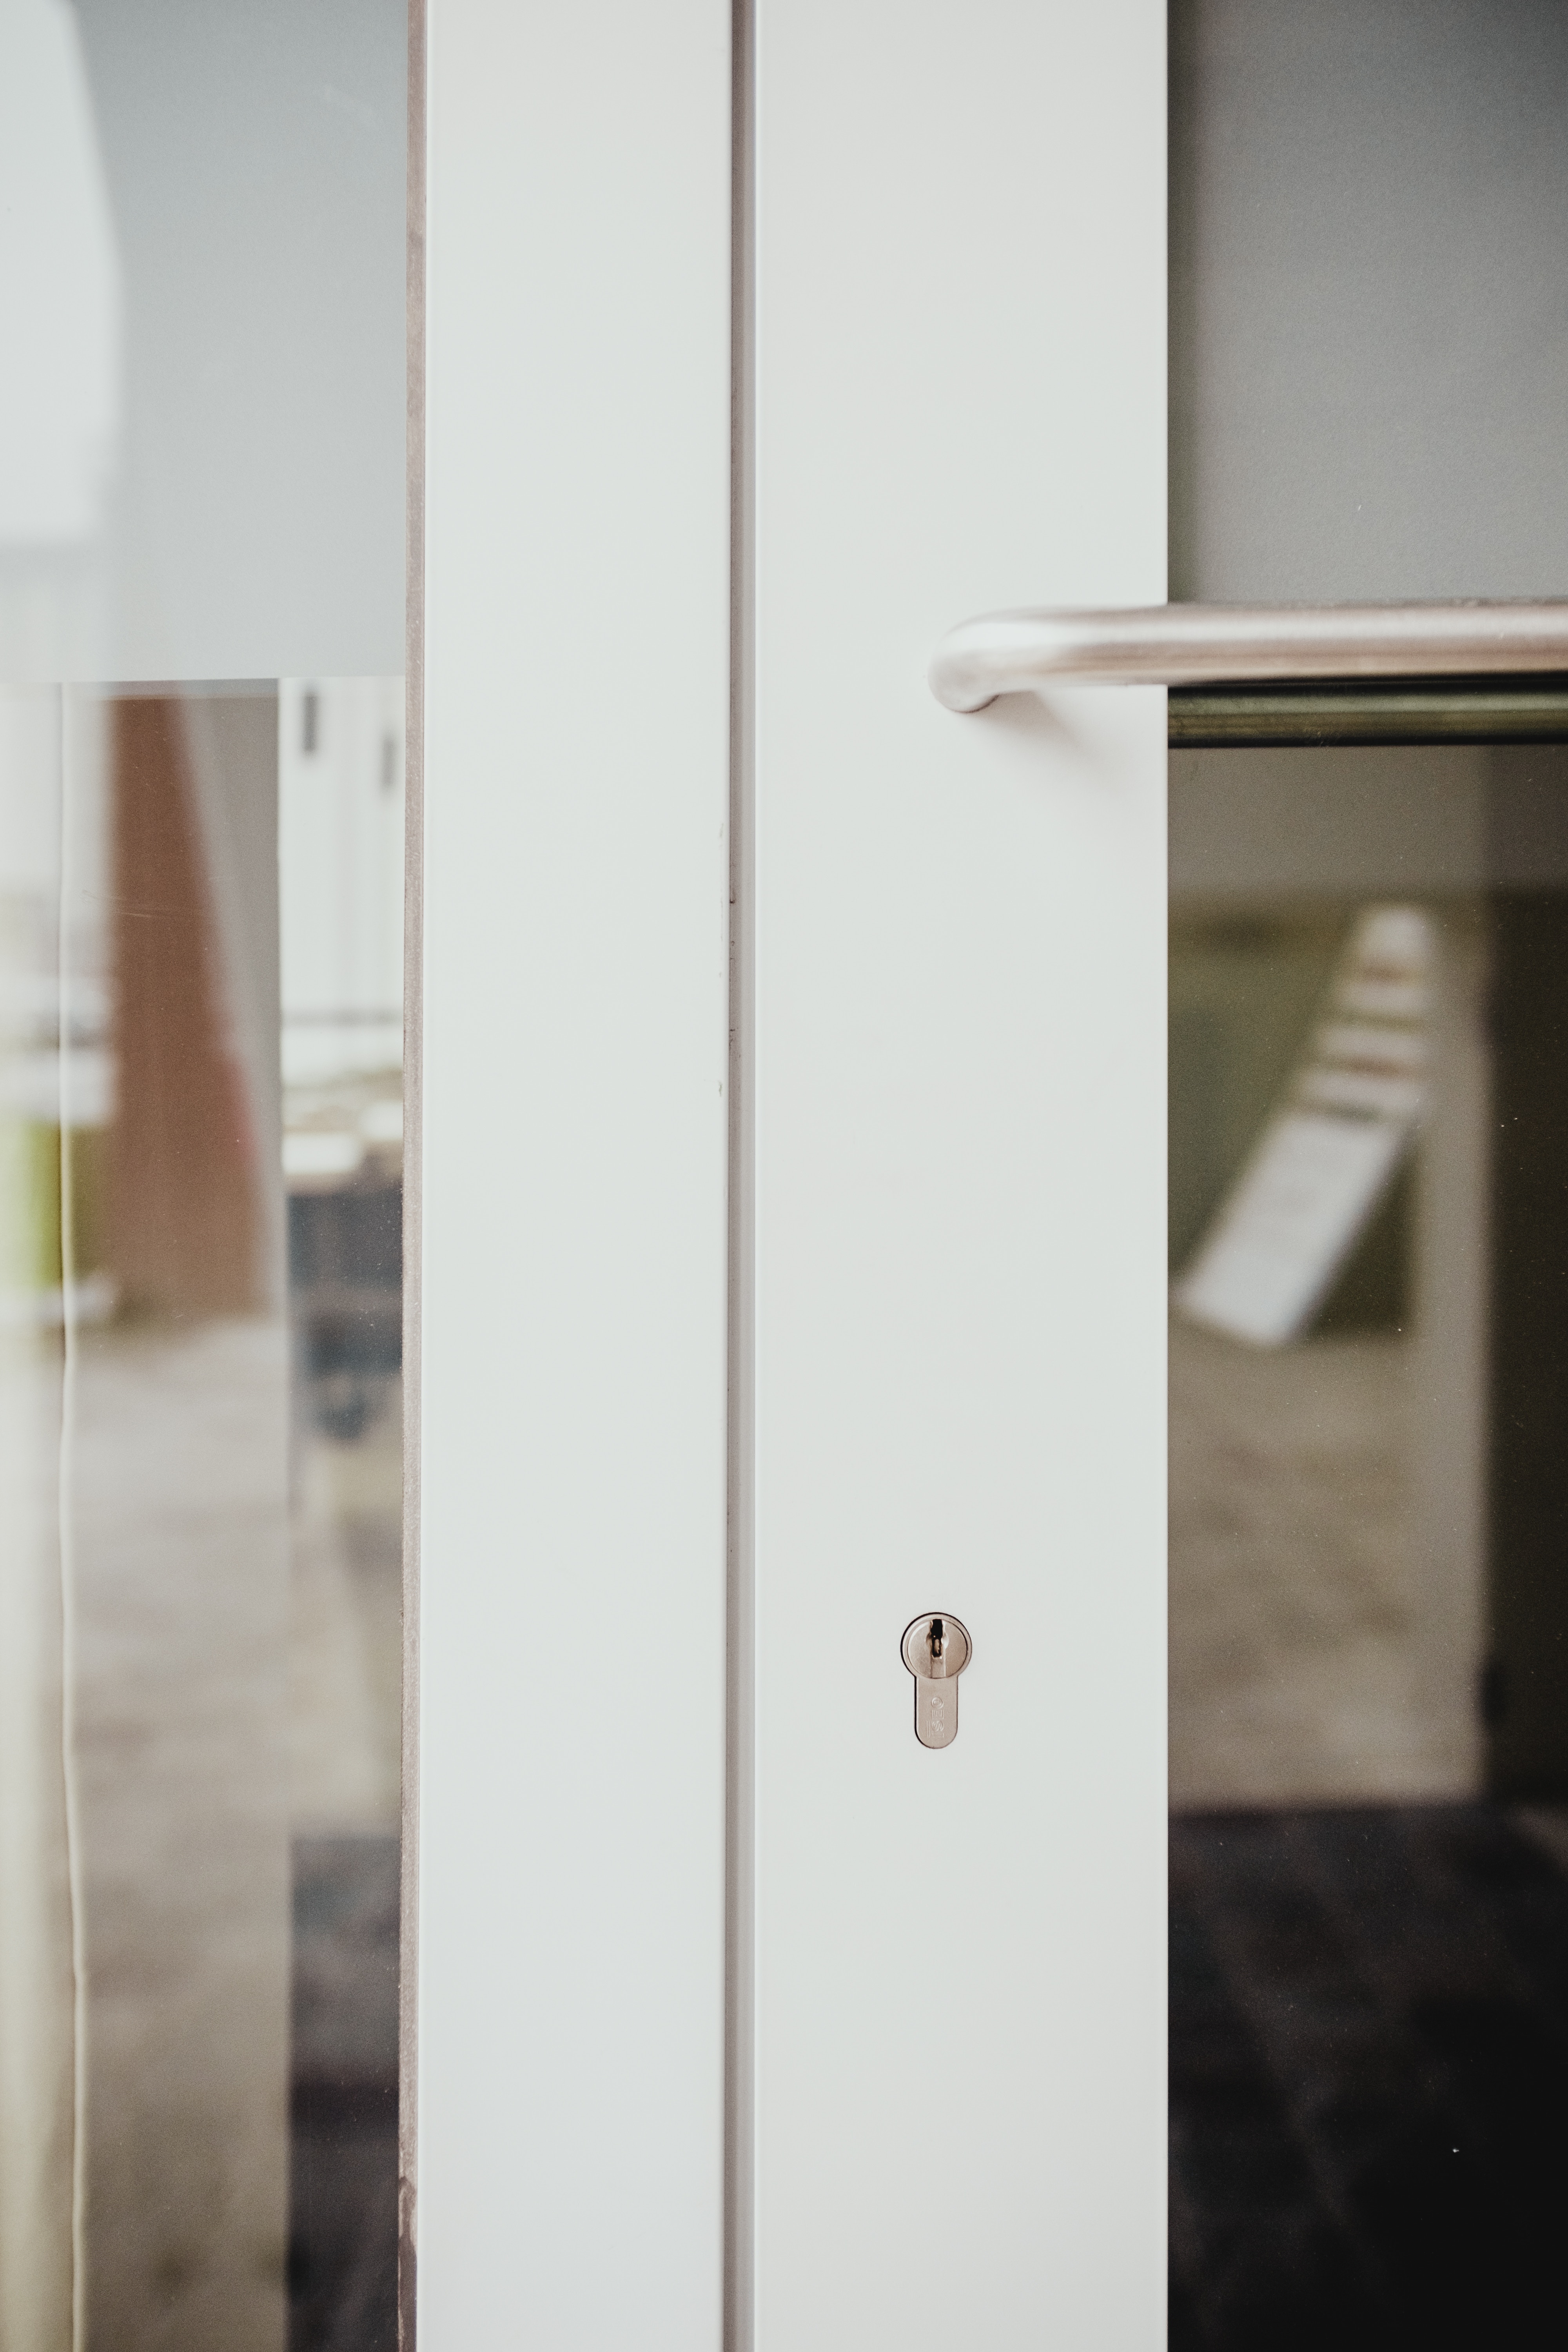 Common Bifold Door Problems And How To Fix Them